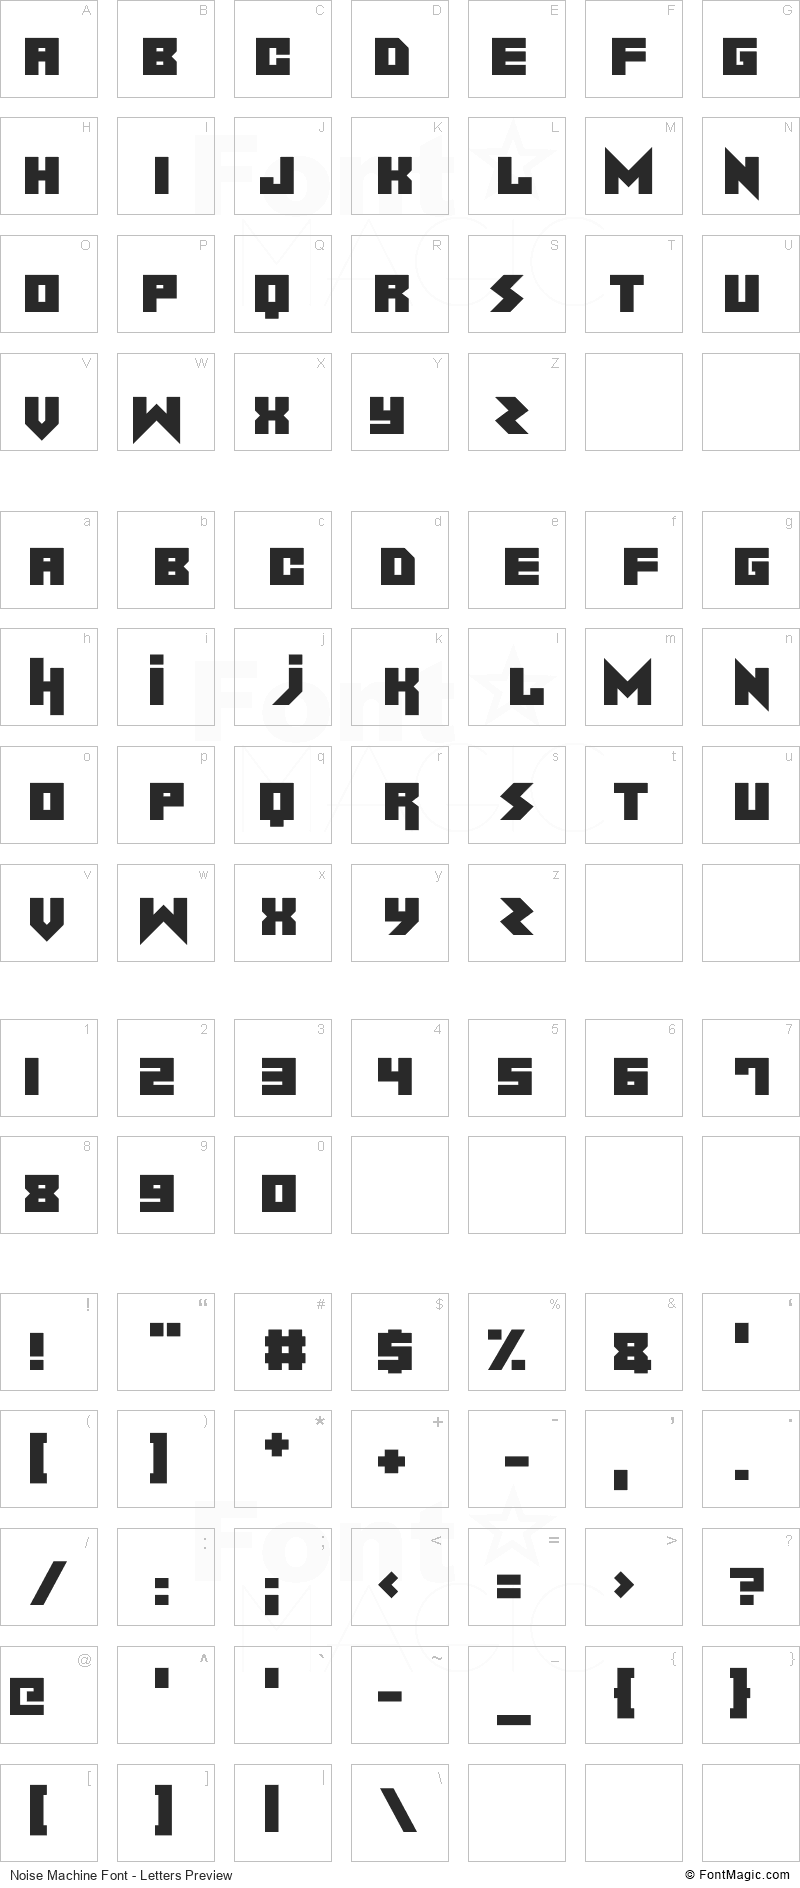 Noise Machine Font - All Latters Preview Chart